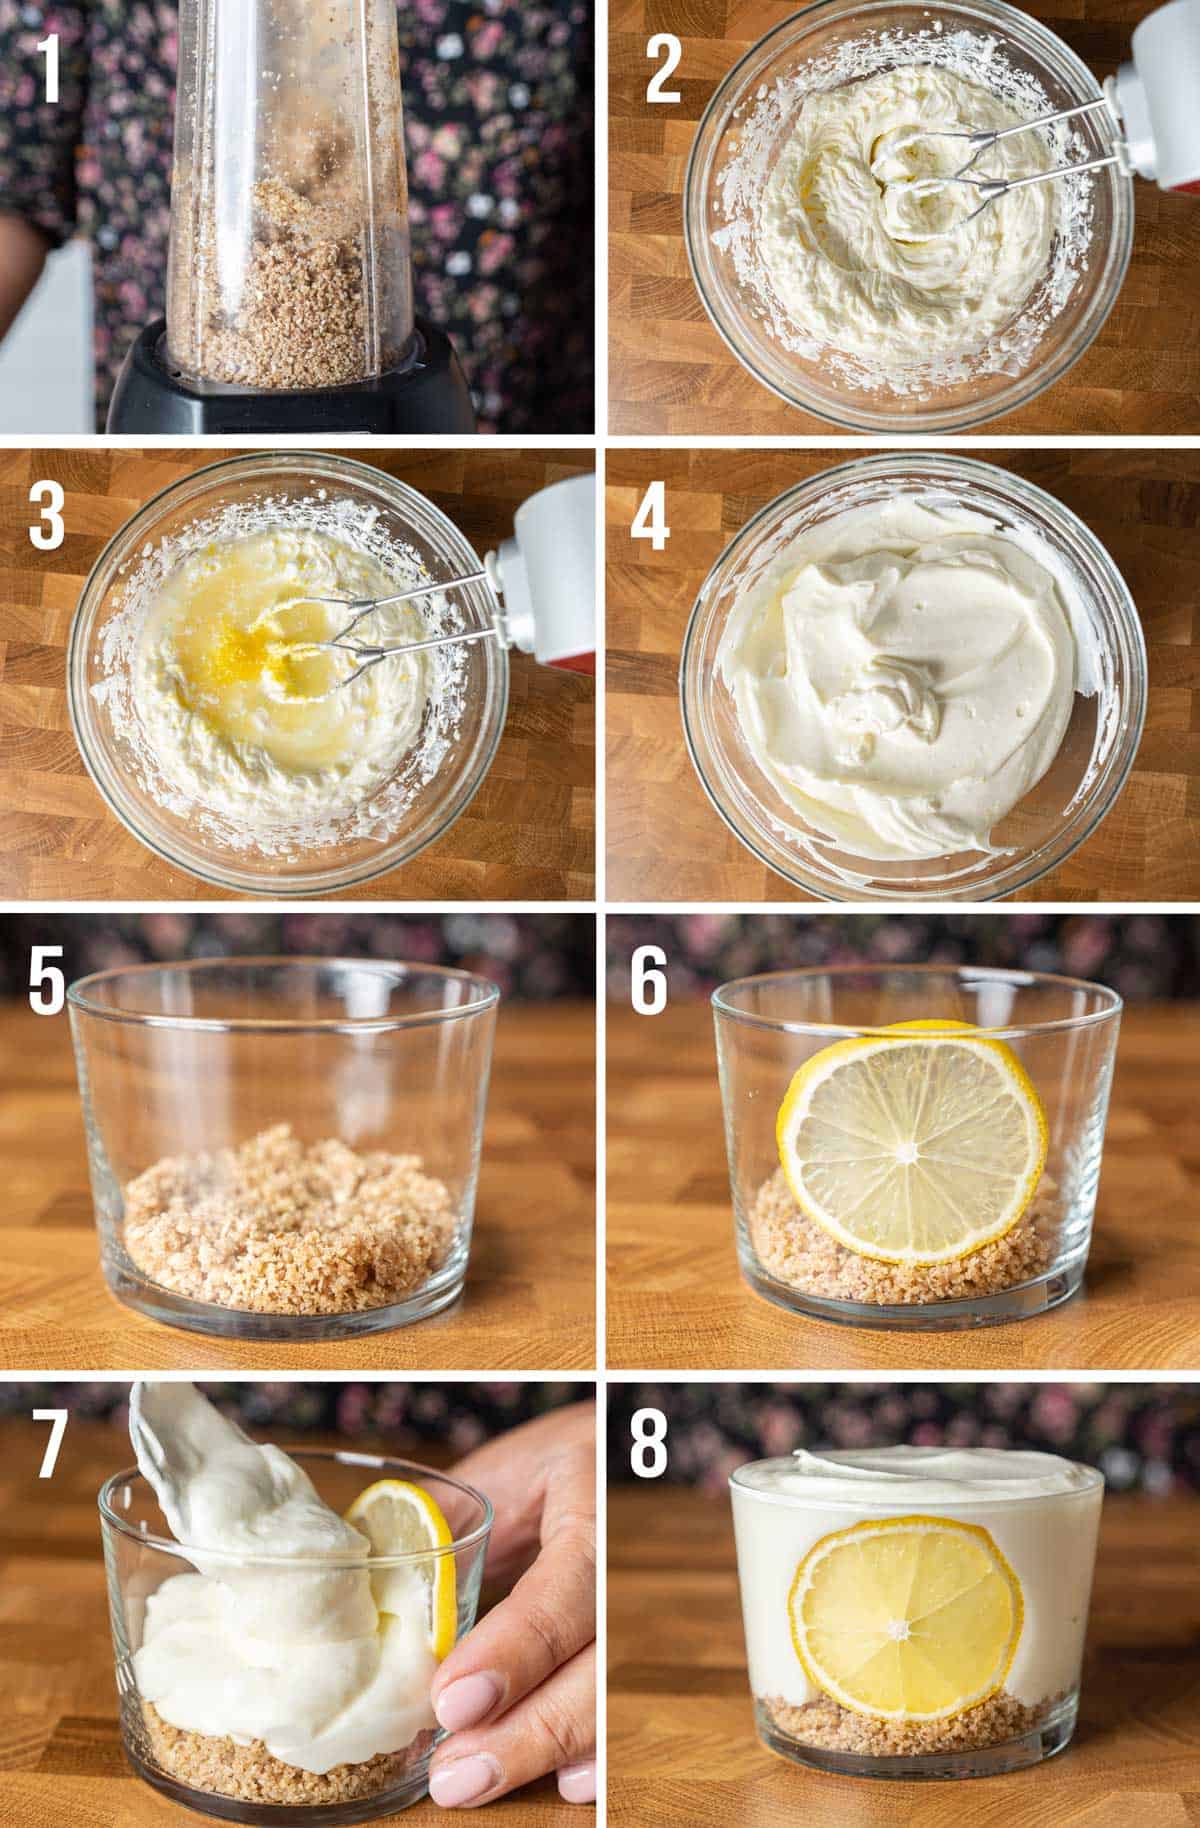 Steps on how to make healthy no-bake lemon cheesecake cups.